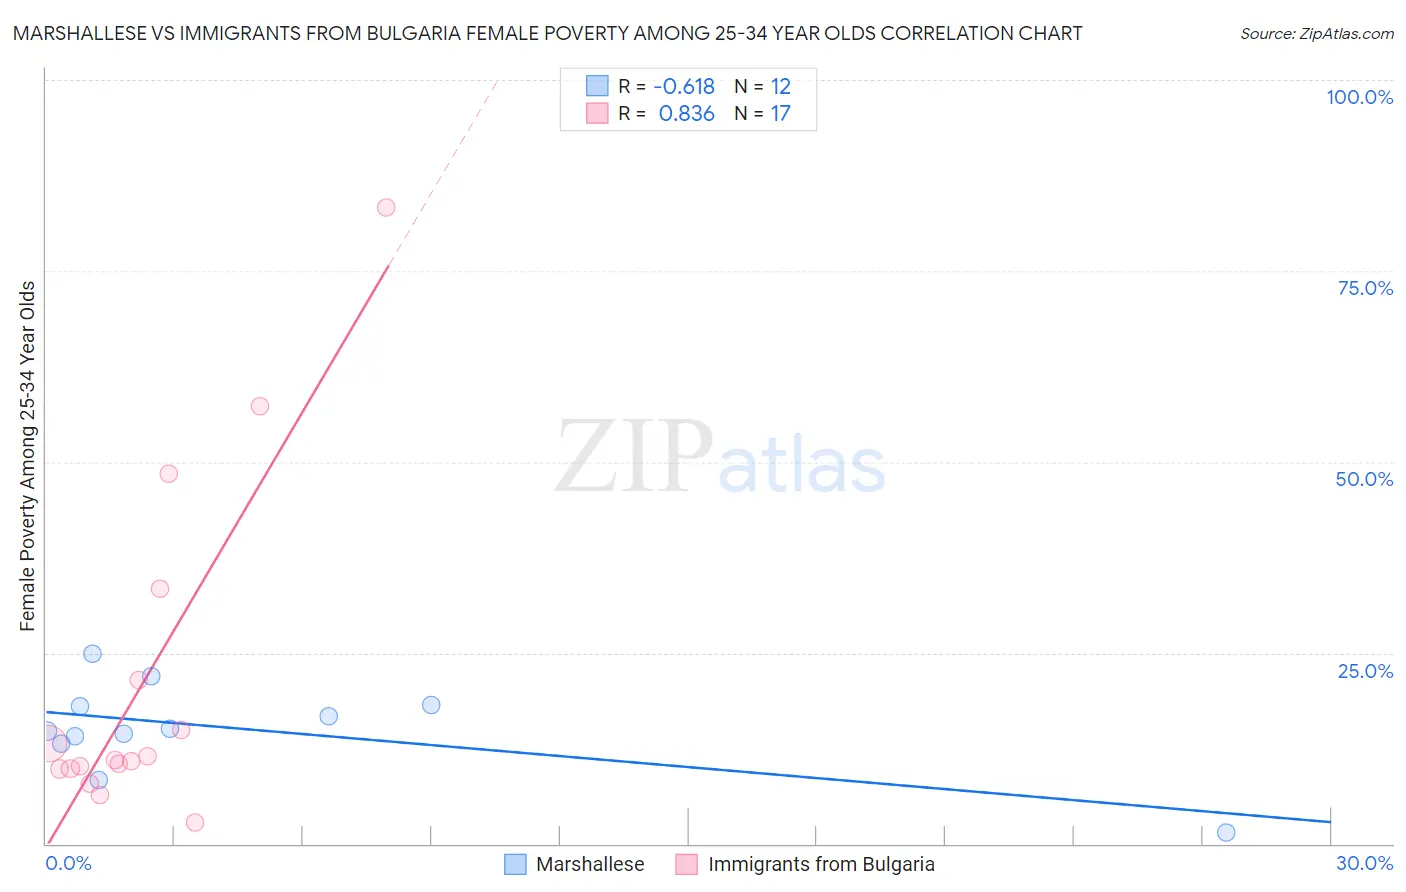 Marshallese vs Immigrants from Bulgaria Female Poverty Among 25-34 Year Olds